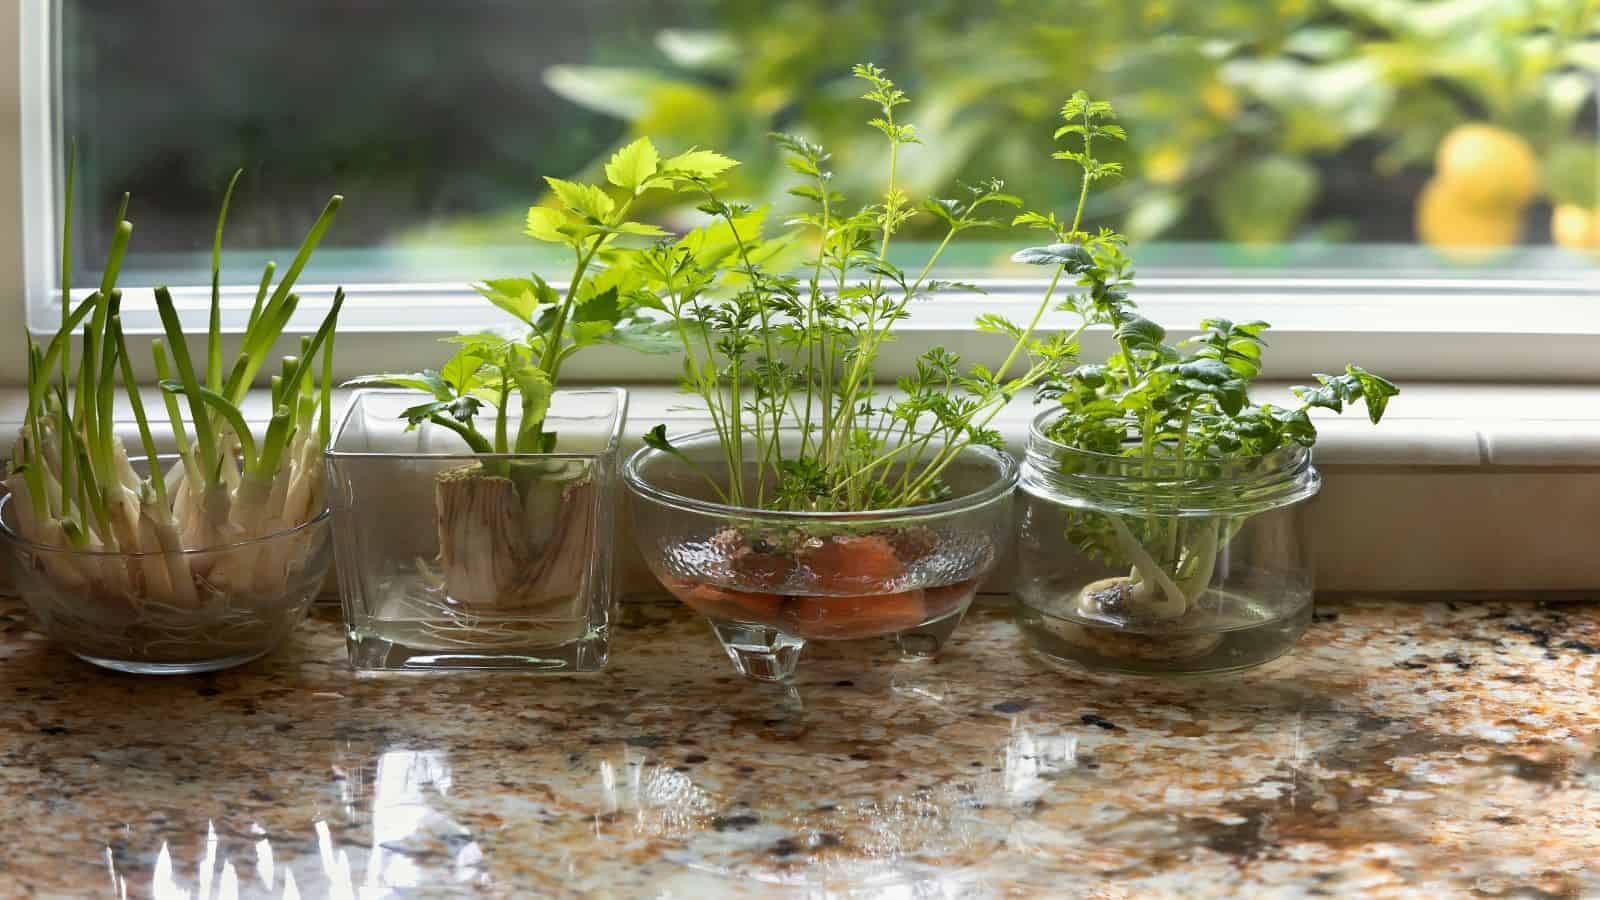 6 Healthful Herb Plants You Can Grow in Water (no soil needed)